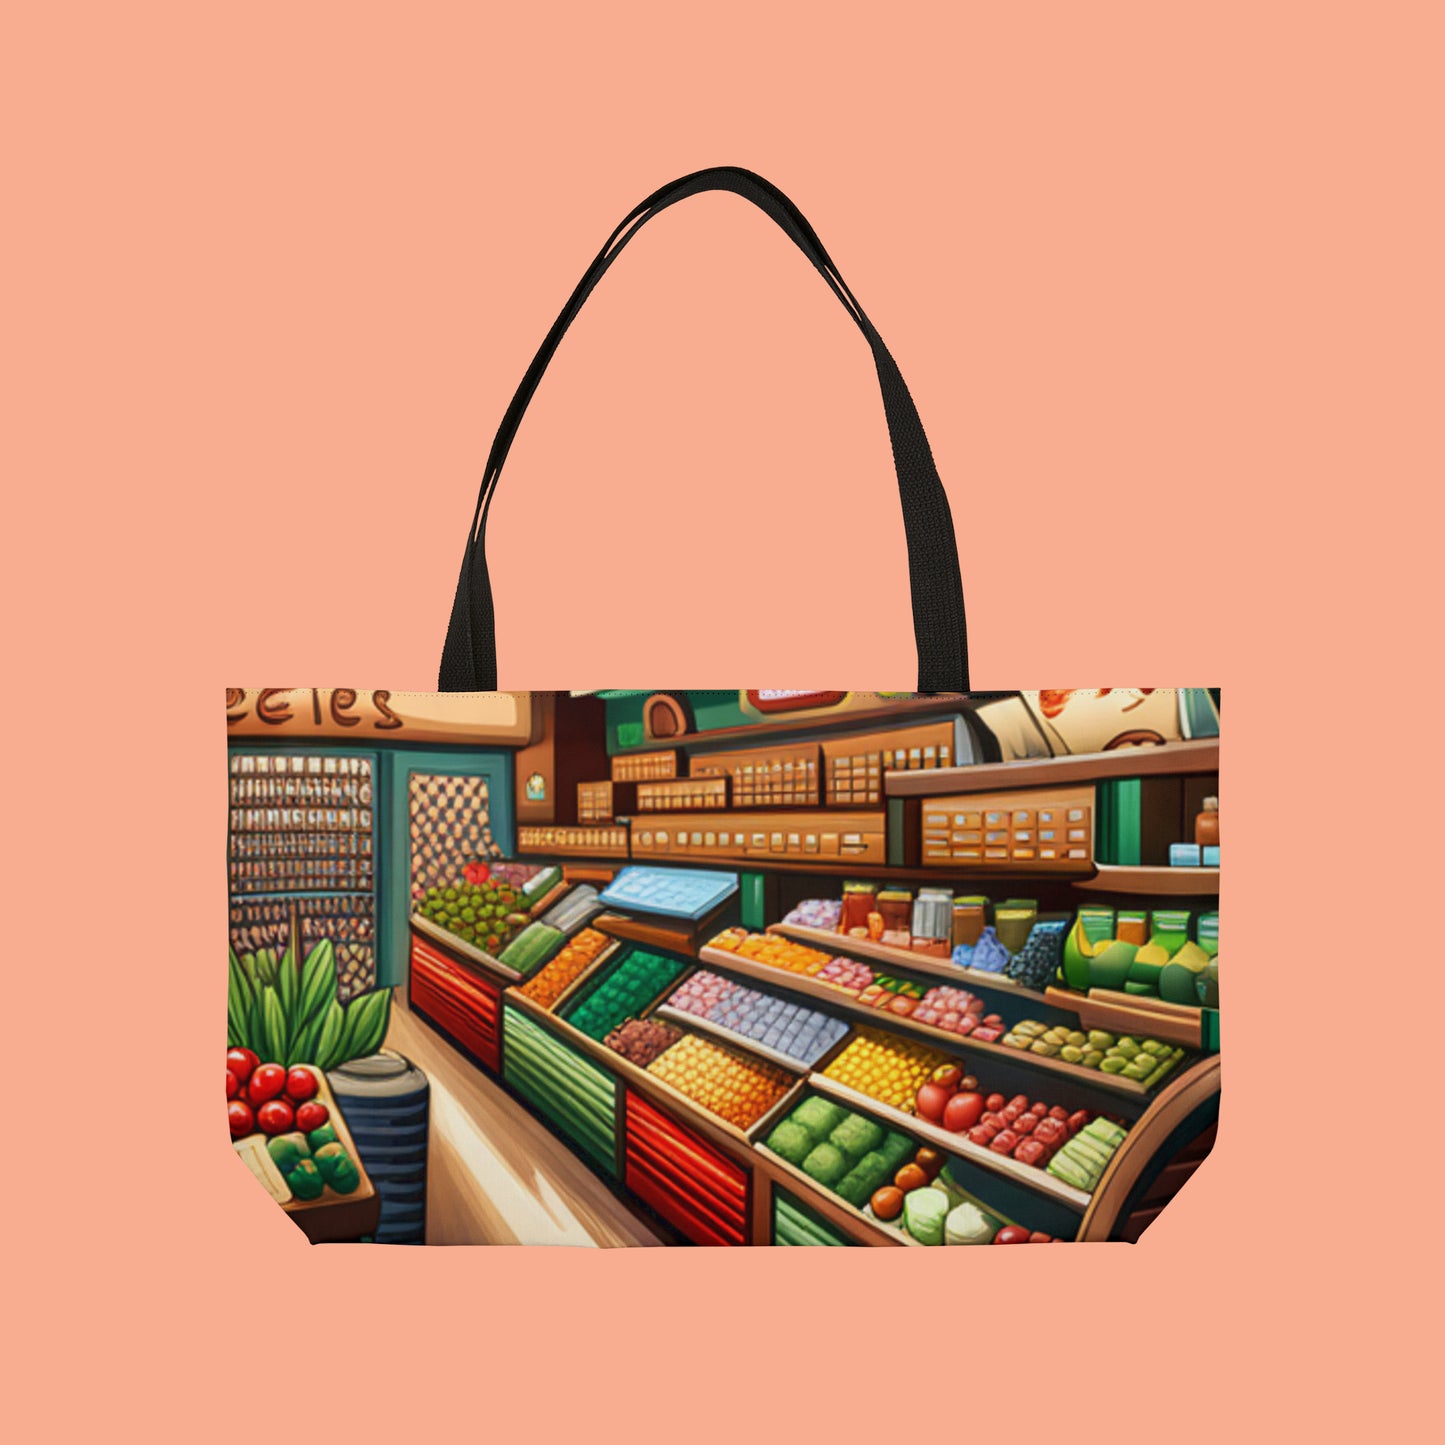 Don’t forget to bring this to the grocery store! A great way to help our planet with this Weekender Tote Bag.